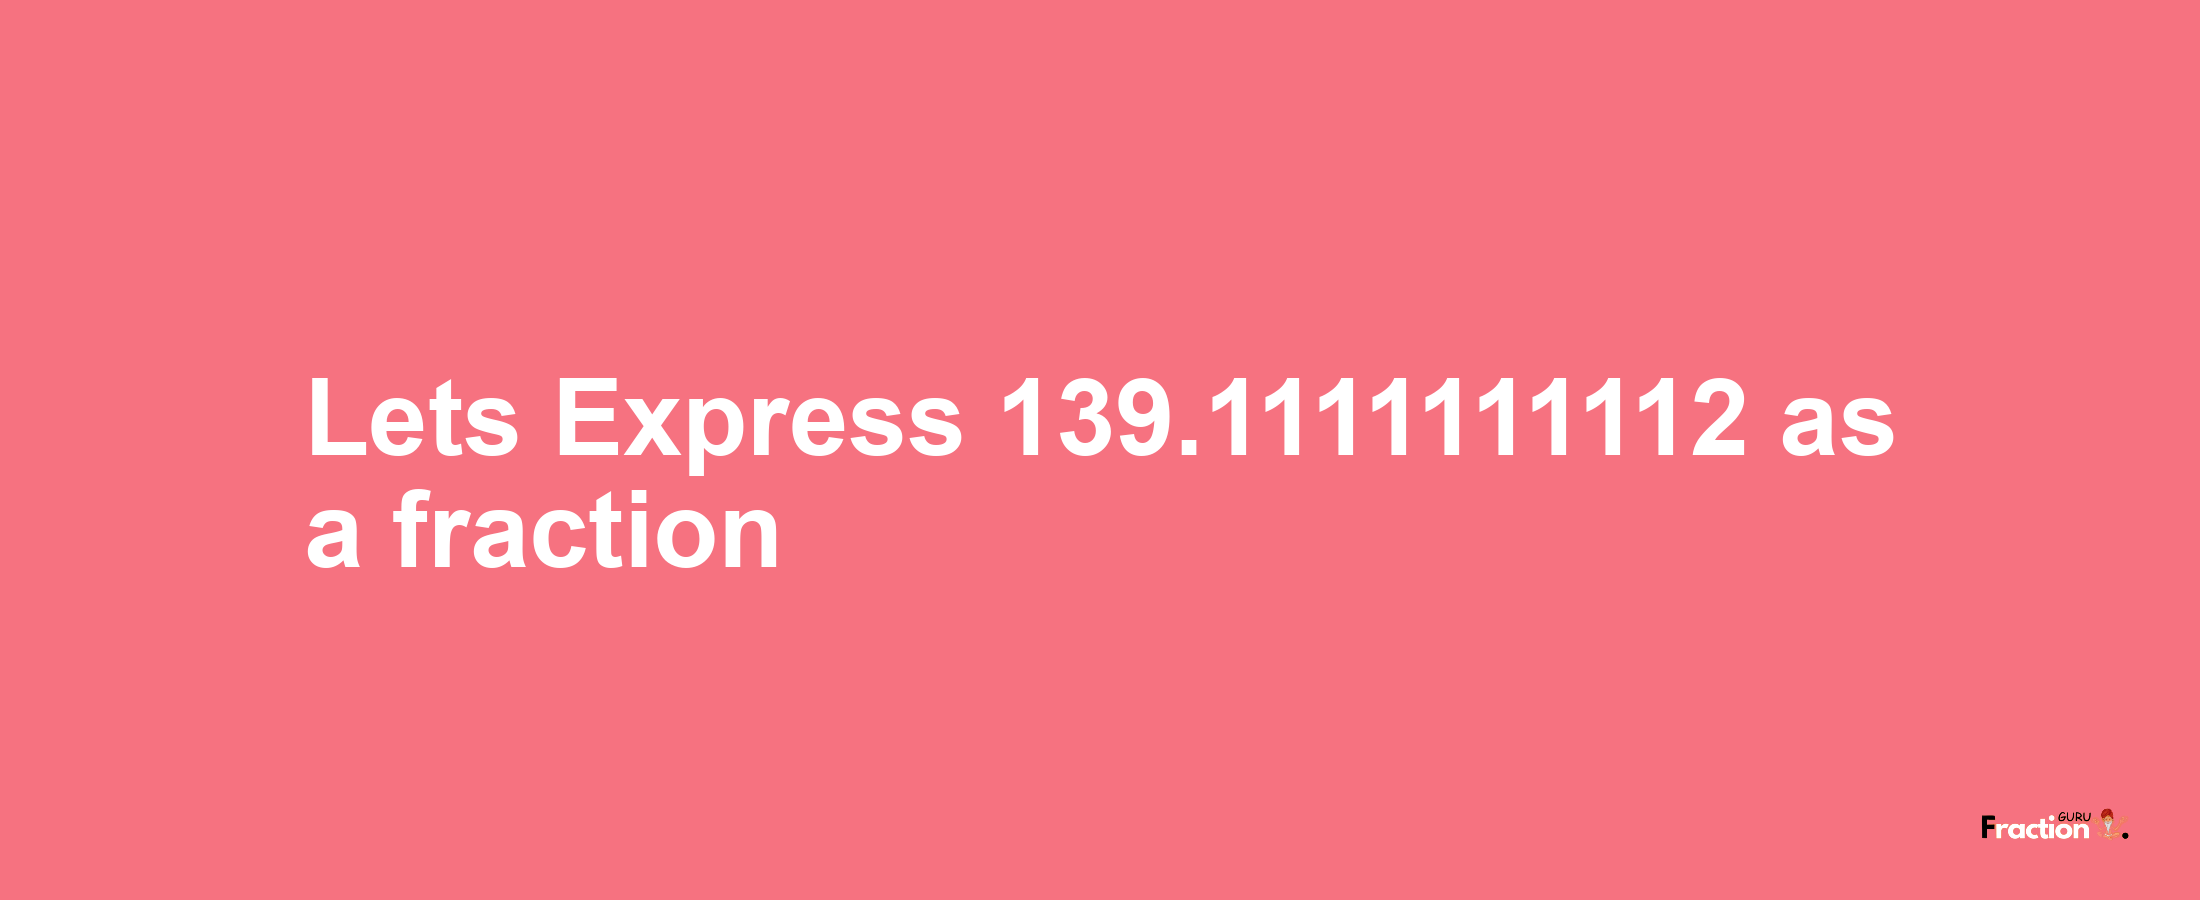 Lets Express 139.1111111112 as afraction